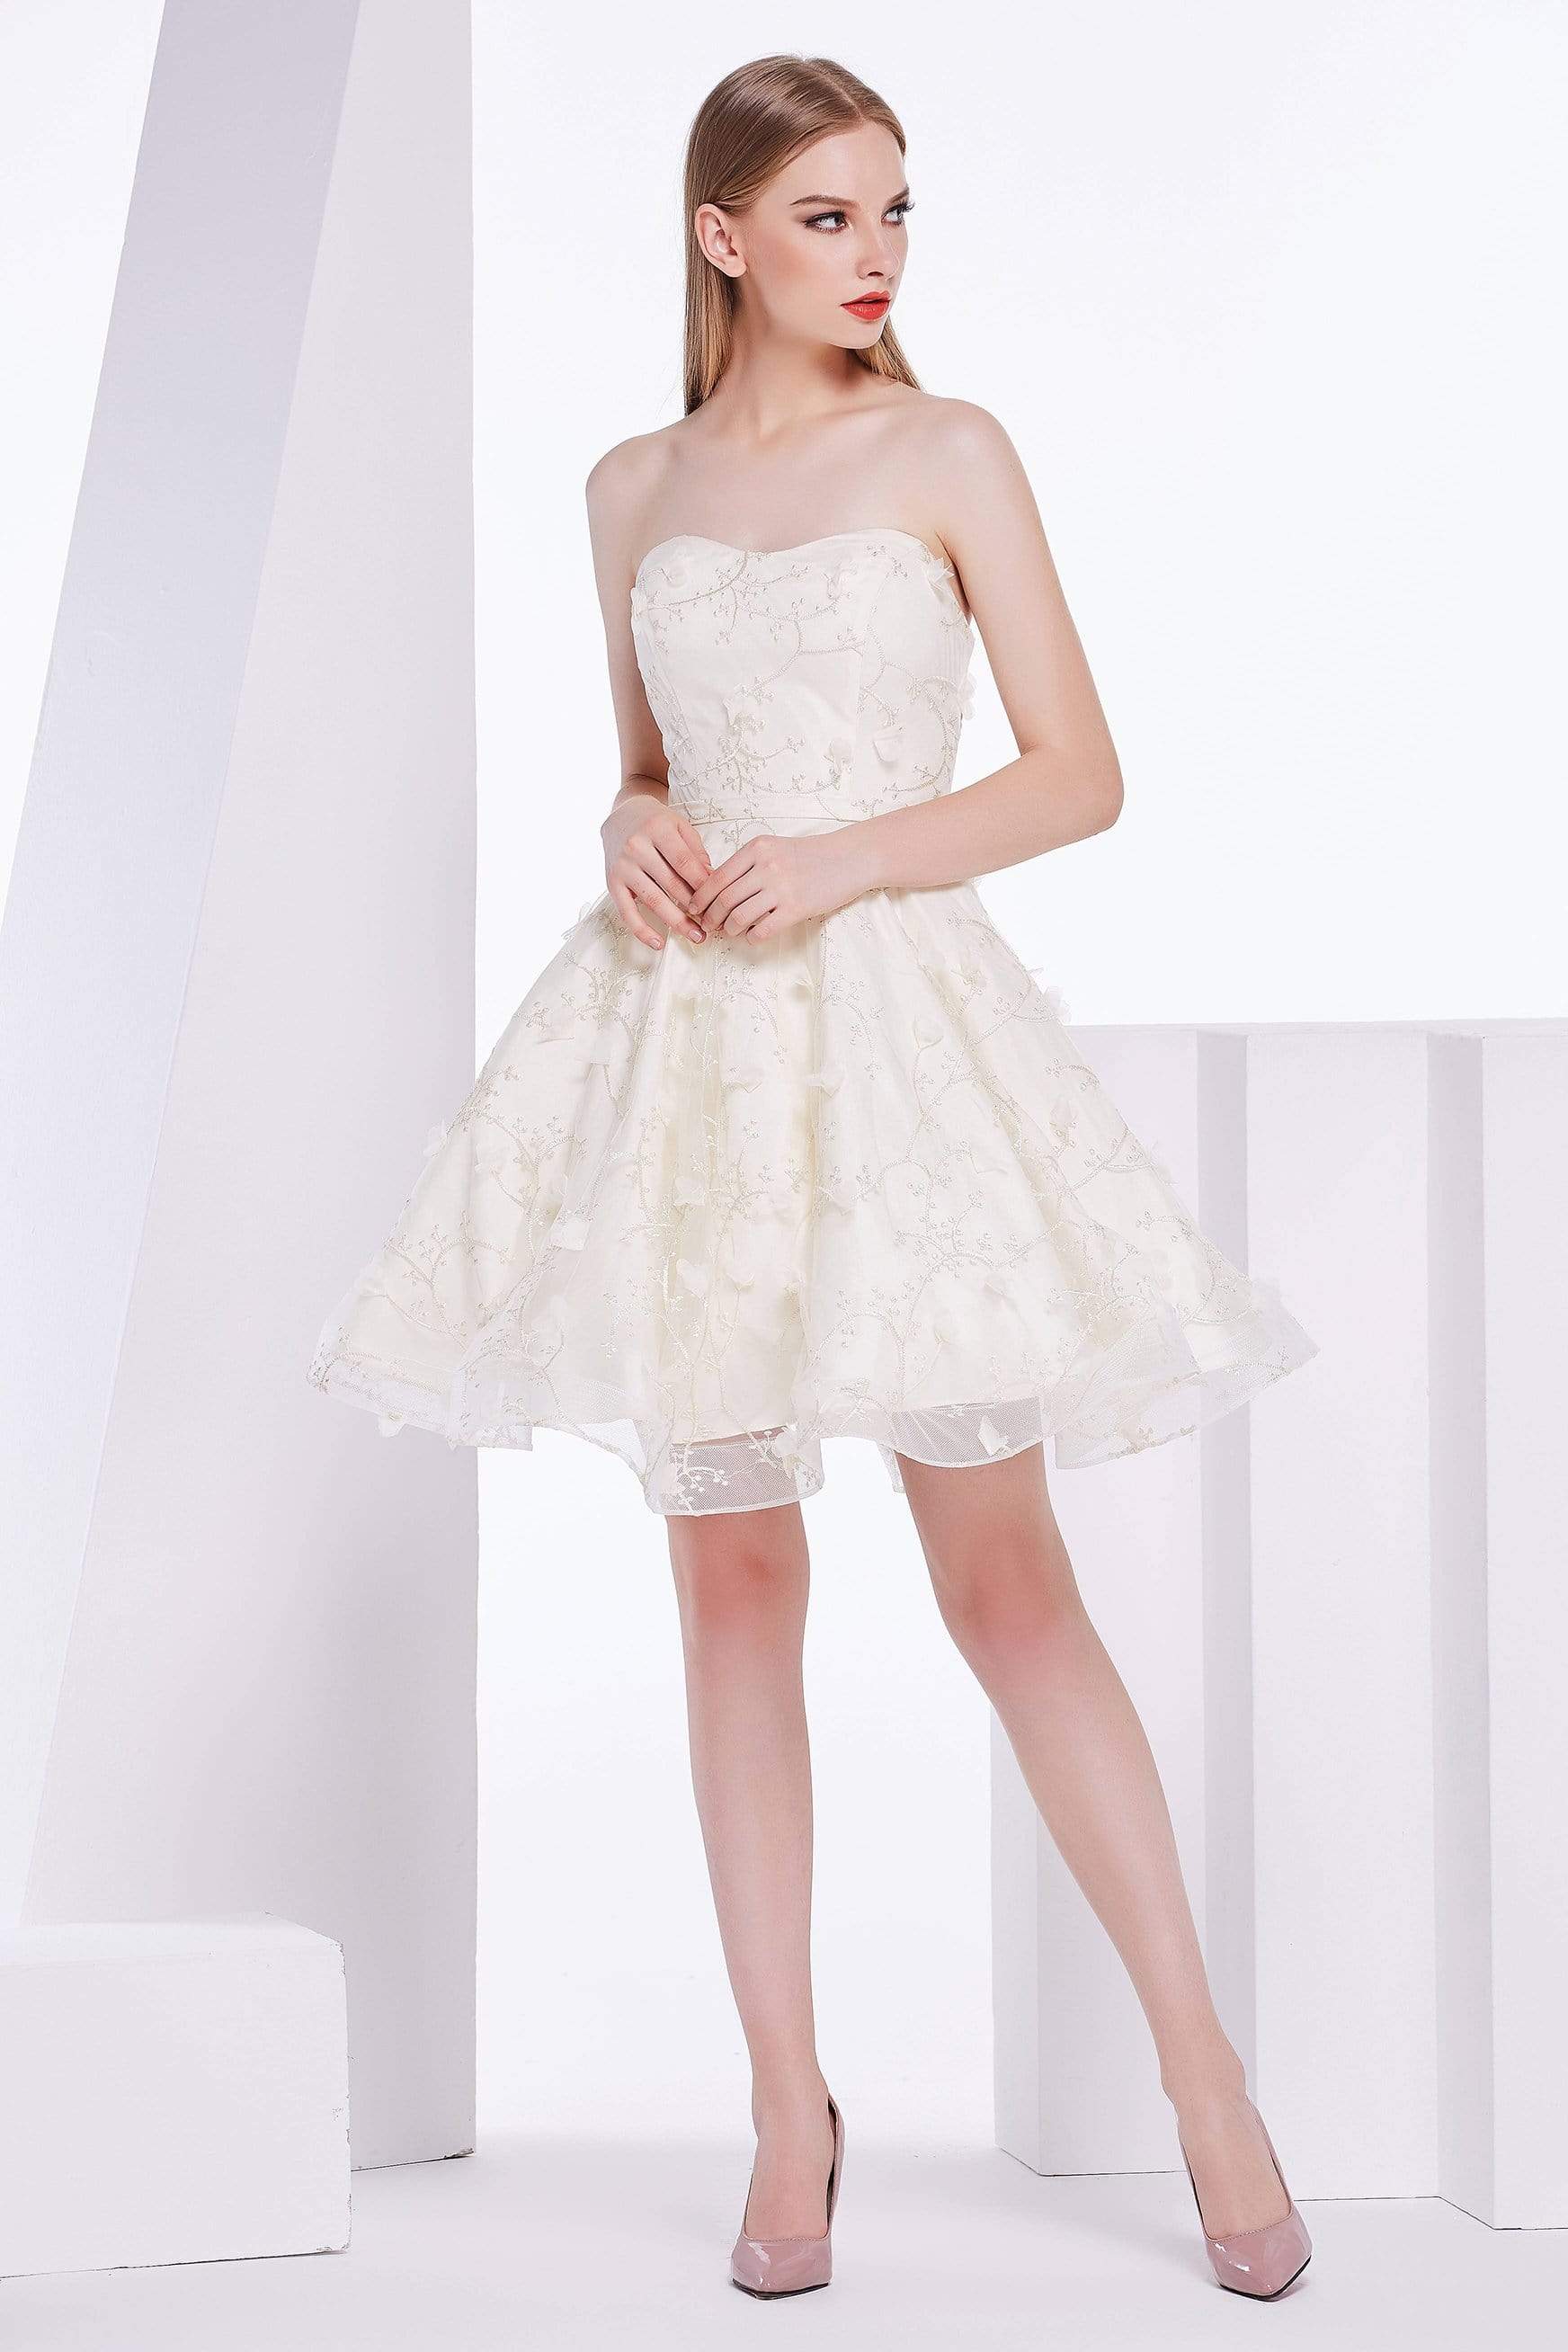 Image of J'Adore Dresses - J14093 Strapless Embroidered Tulle A-line Dress